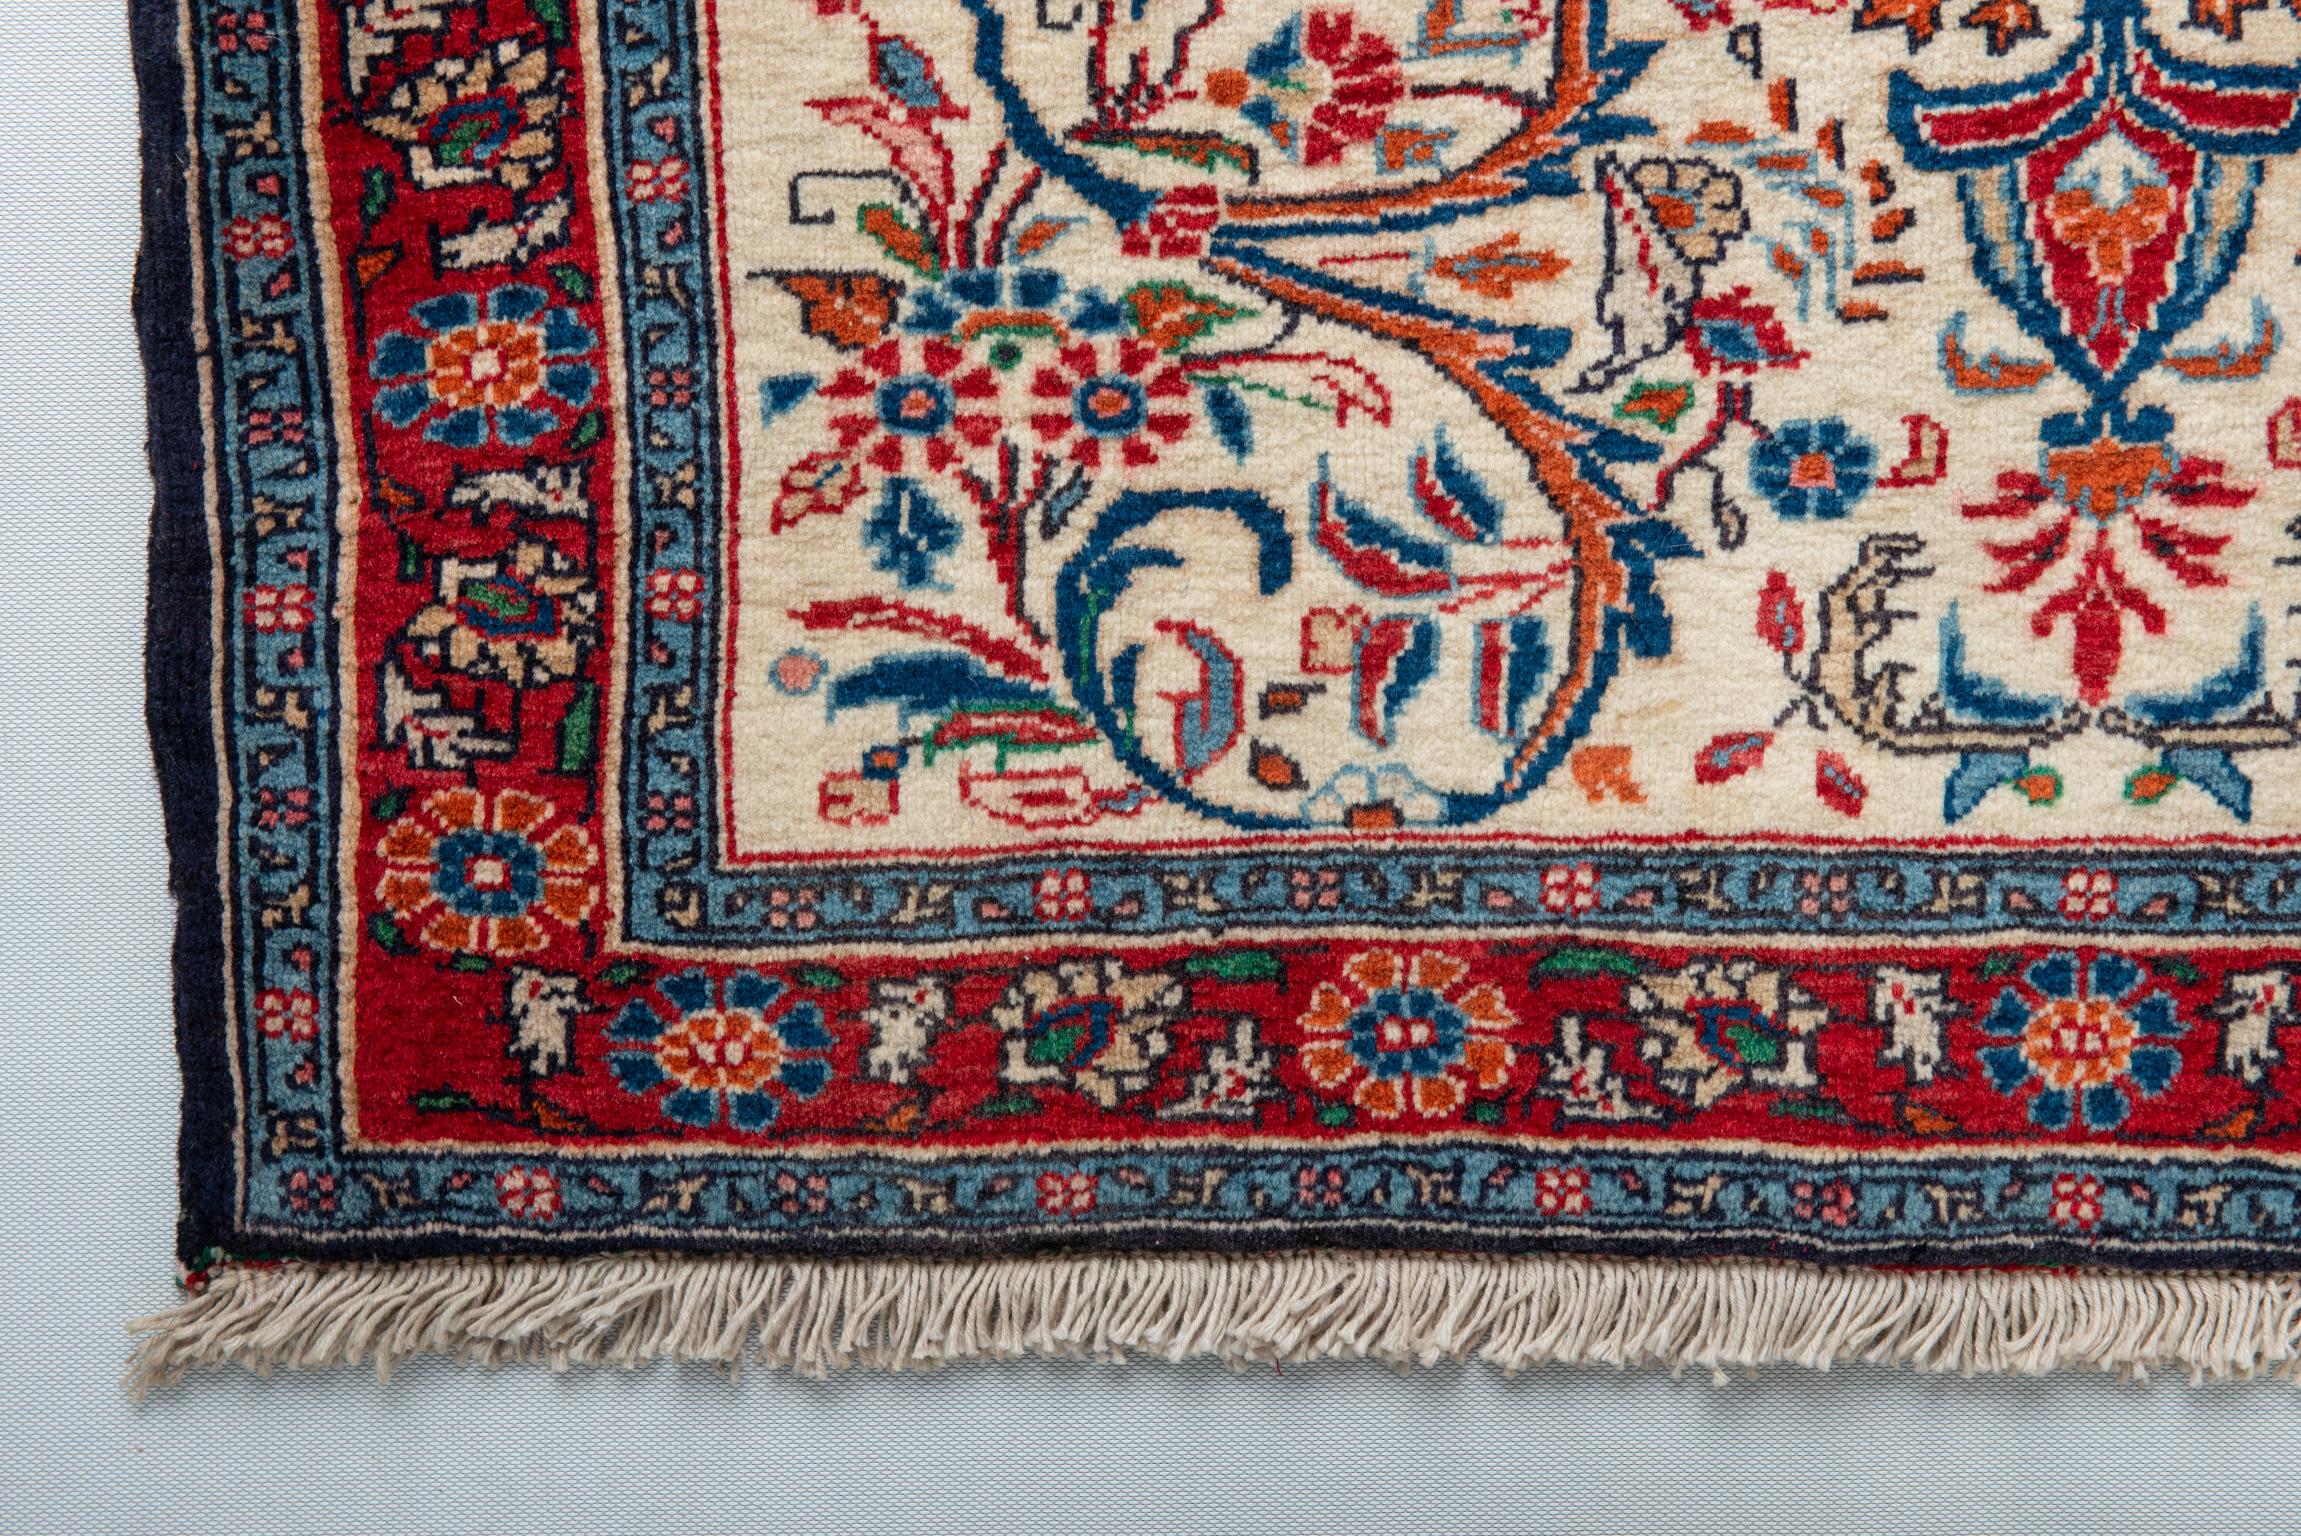 20th Century Pair of Little Square Indian Carpets or Cushions For Sale